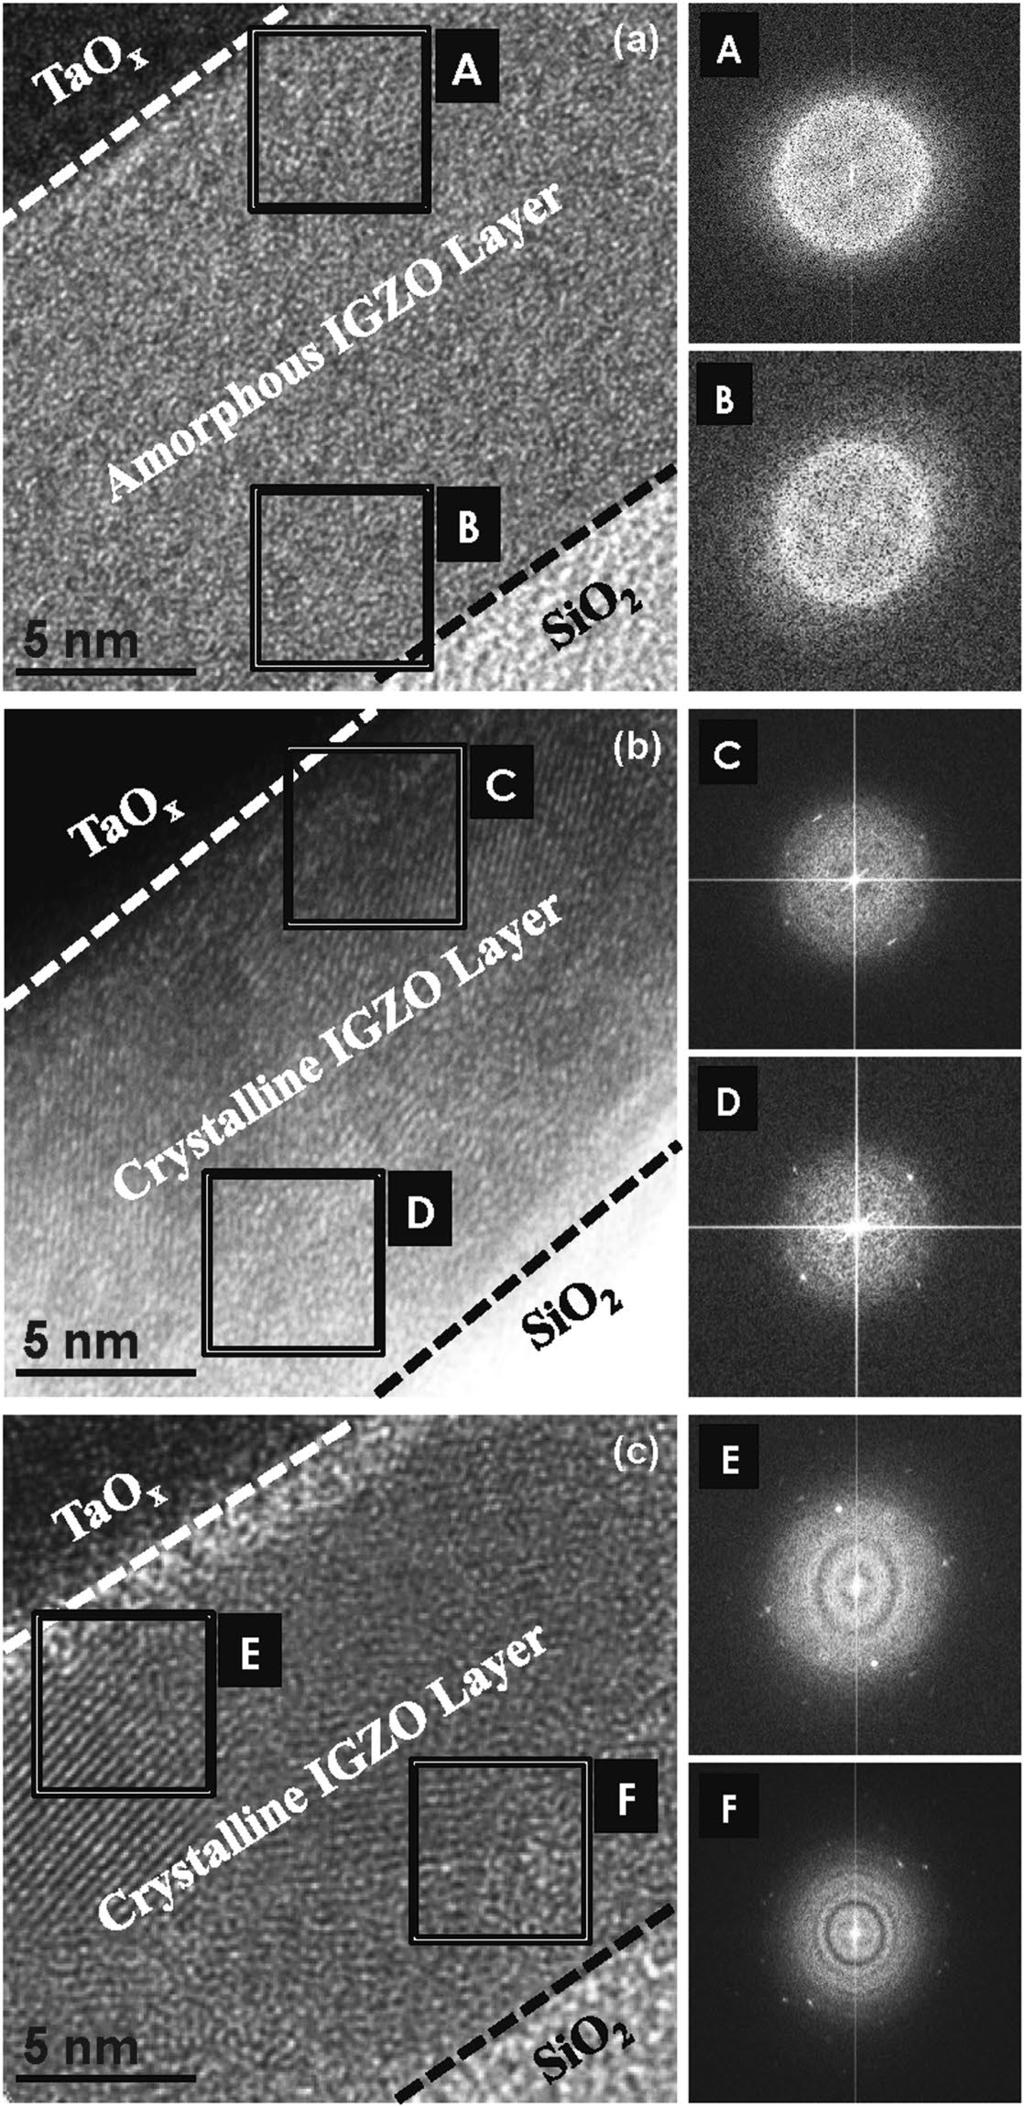 www.nature.com/scientificreports/ Figure 2. Cross-sectional TEM images of the IGZO layer with the Ta catalytic layer after thermal annealing at (A) 200 C, (B) 300 C, and (C) 400 C under O2 atmosphere.